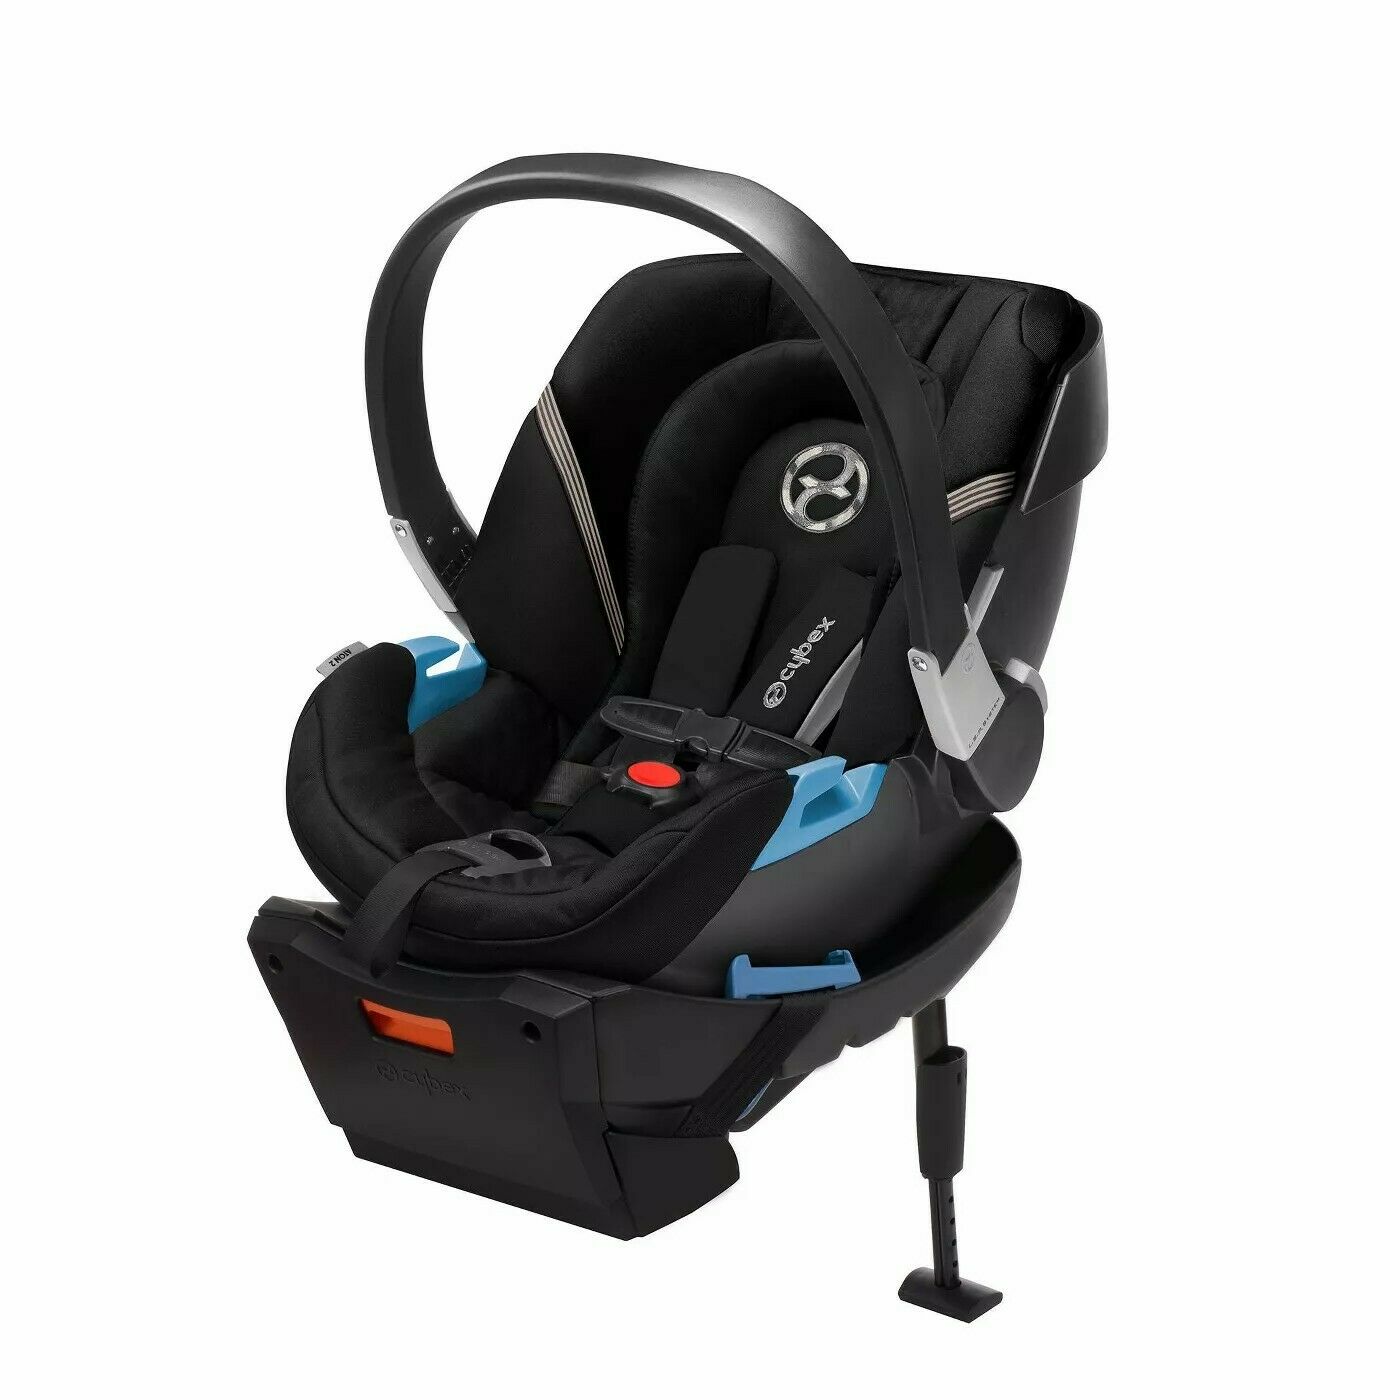 Cybex Balios S Lux3-in-1 Baby Stroller with Car Seat Travel System New